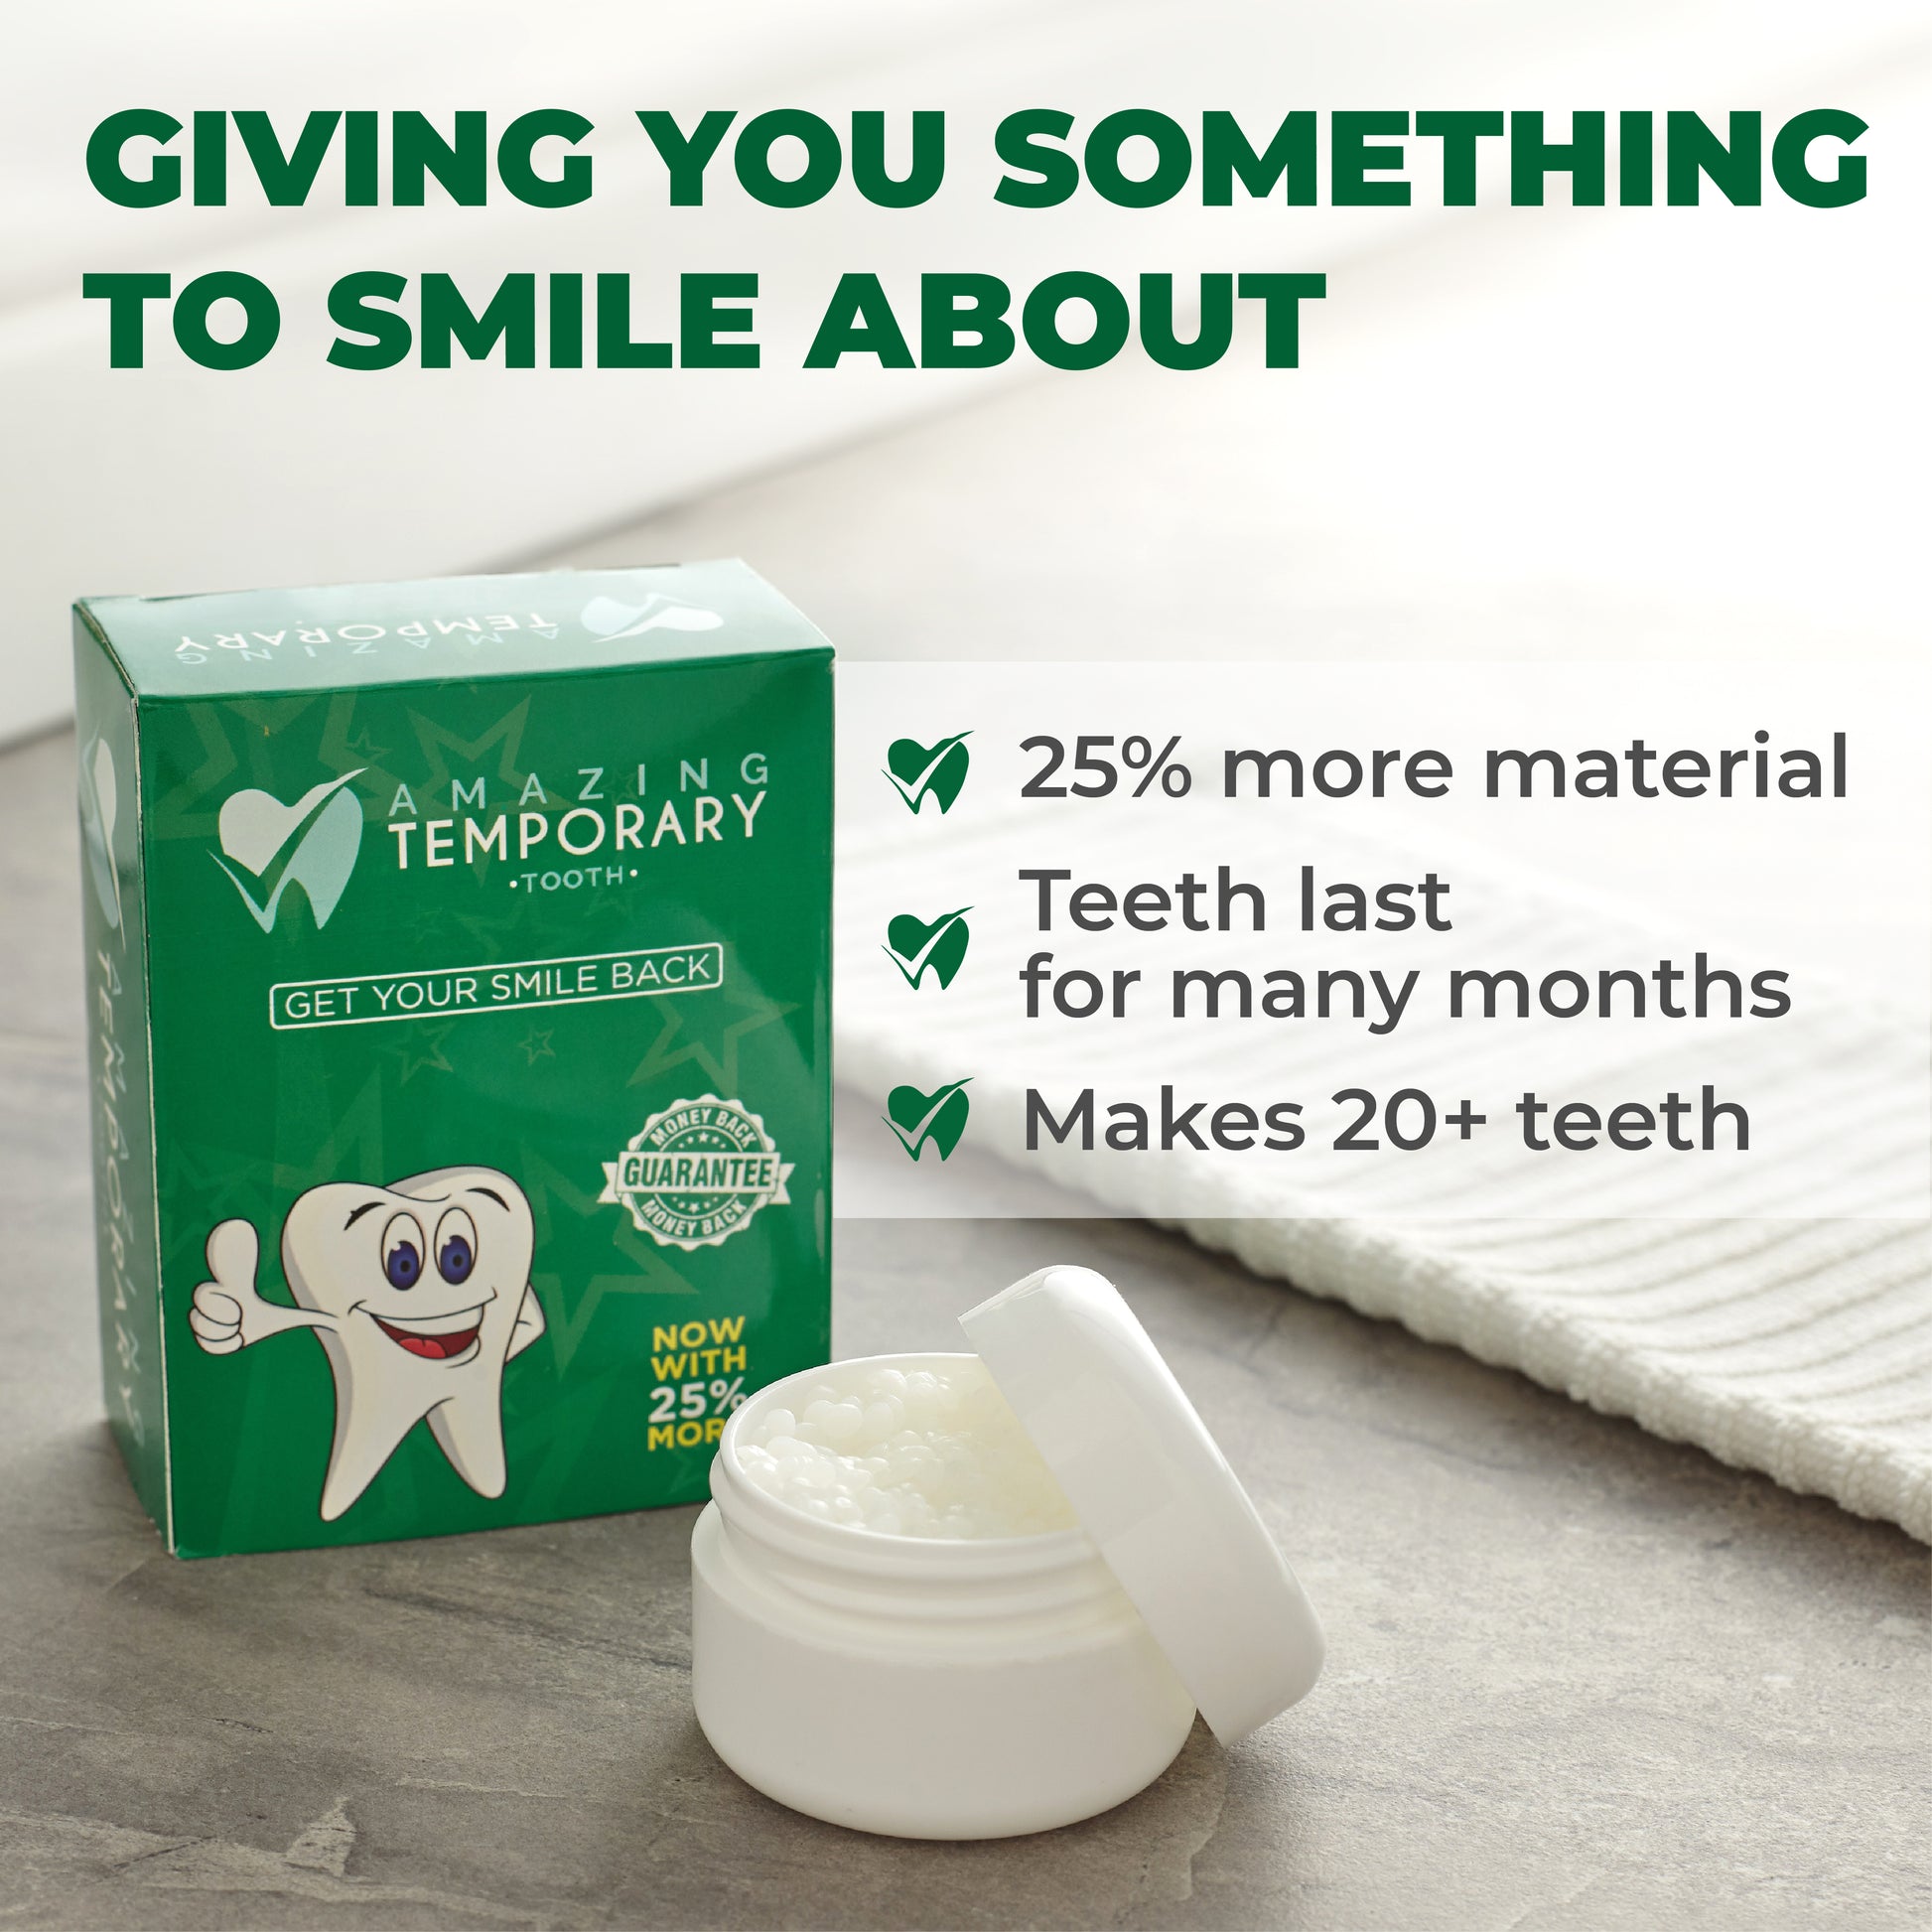 Temporary Tooth Replacement Kit, 100% Money-Back Guarantee